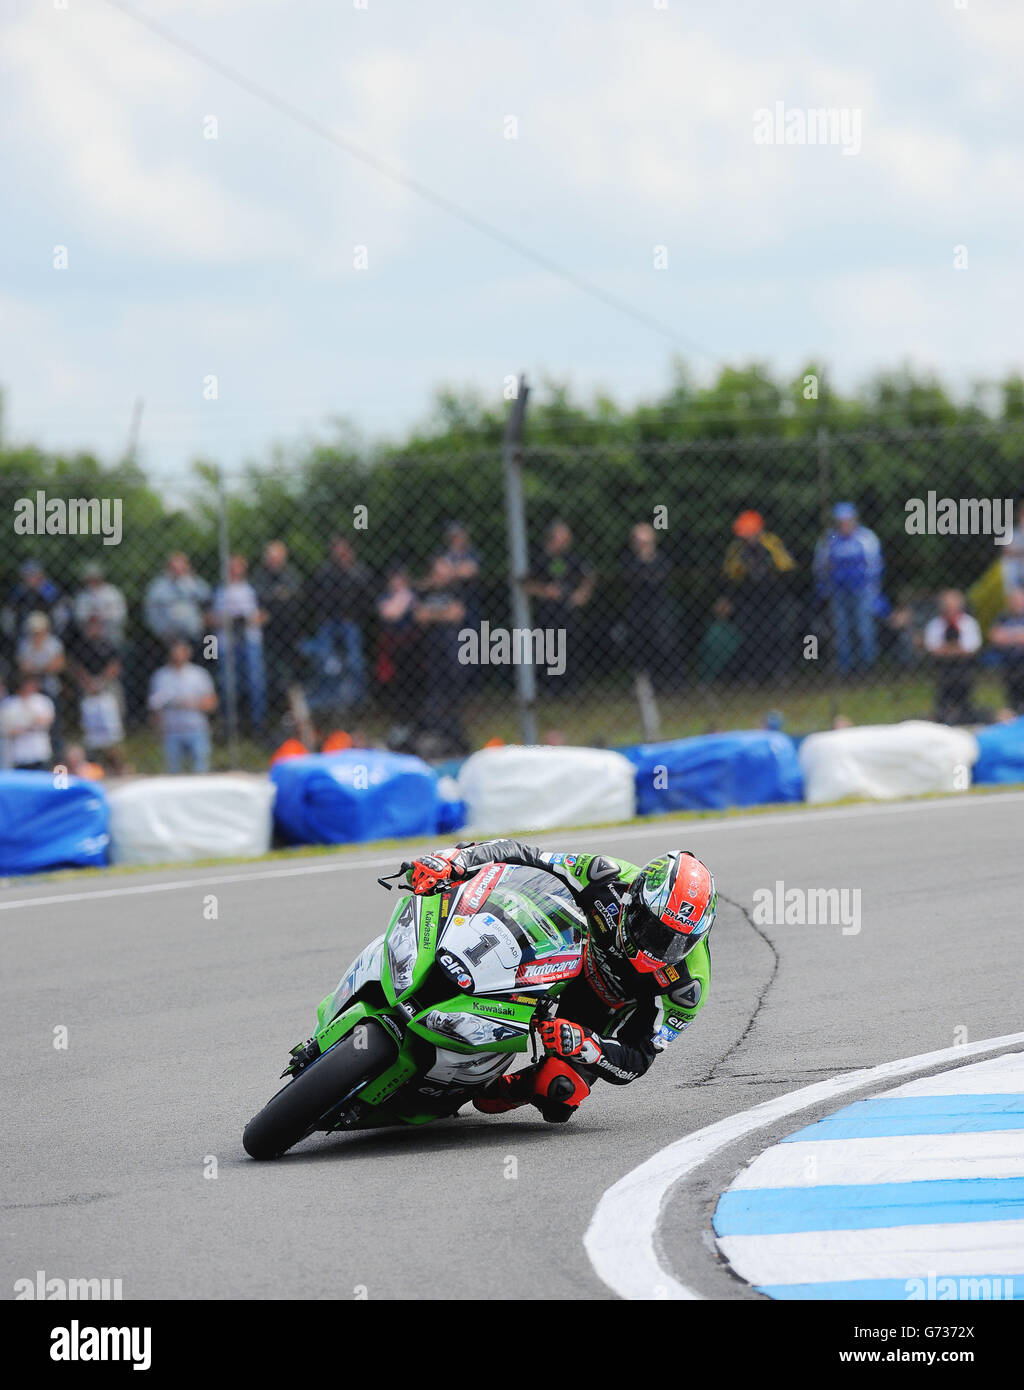 Motor Racing - Superbike FIM World Championship - Round Five - Race Day - Donington Park. Kawasaki's Tom Sykes of Great Brtiain during round 5 of the Superbikes FIM World Championship at Donington Park, Donington. Stock Photo